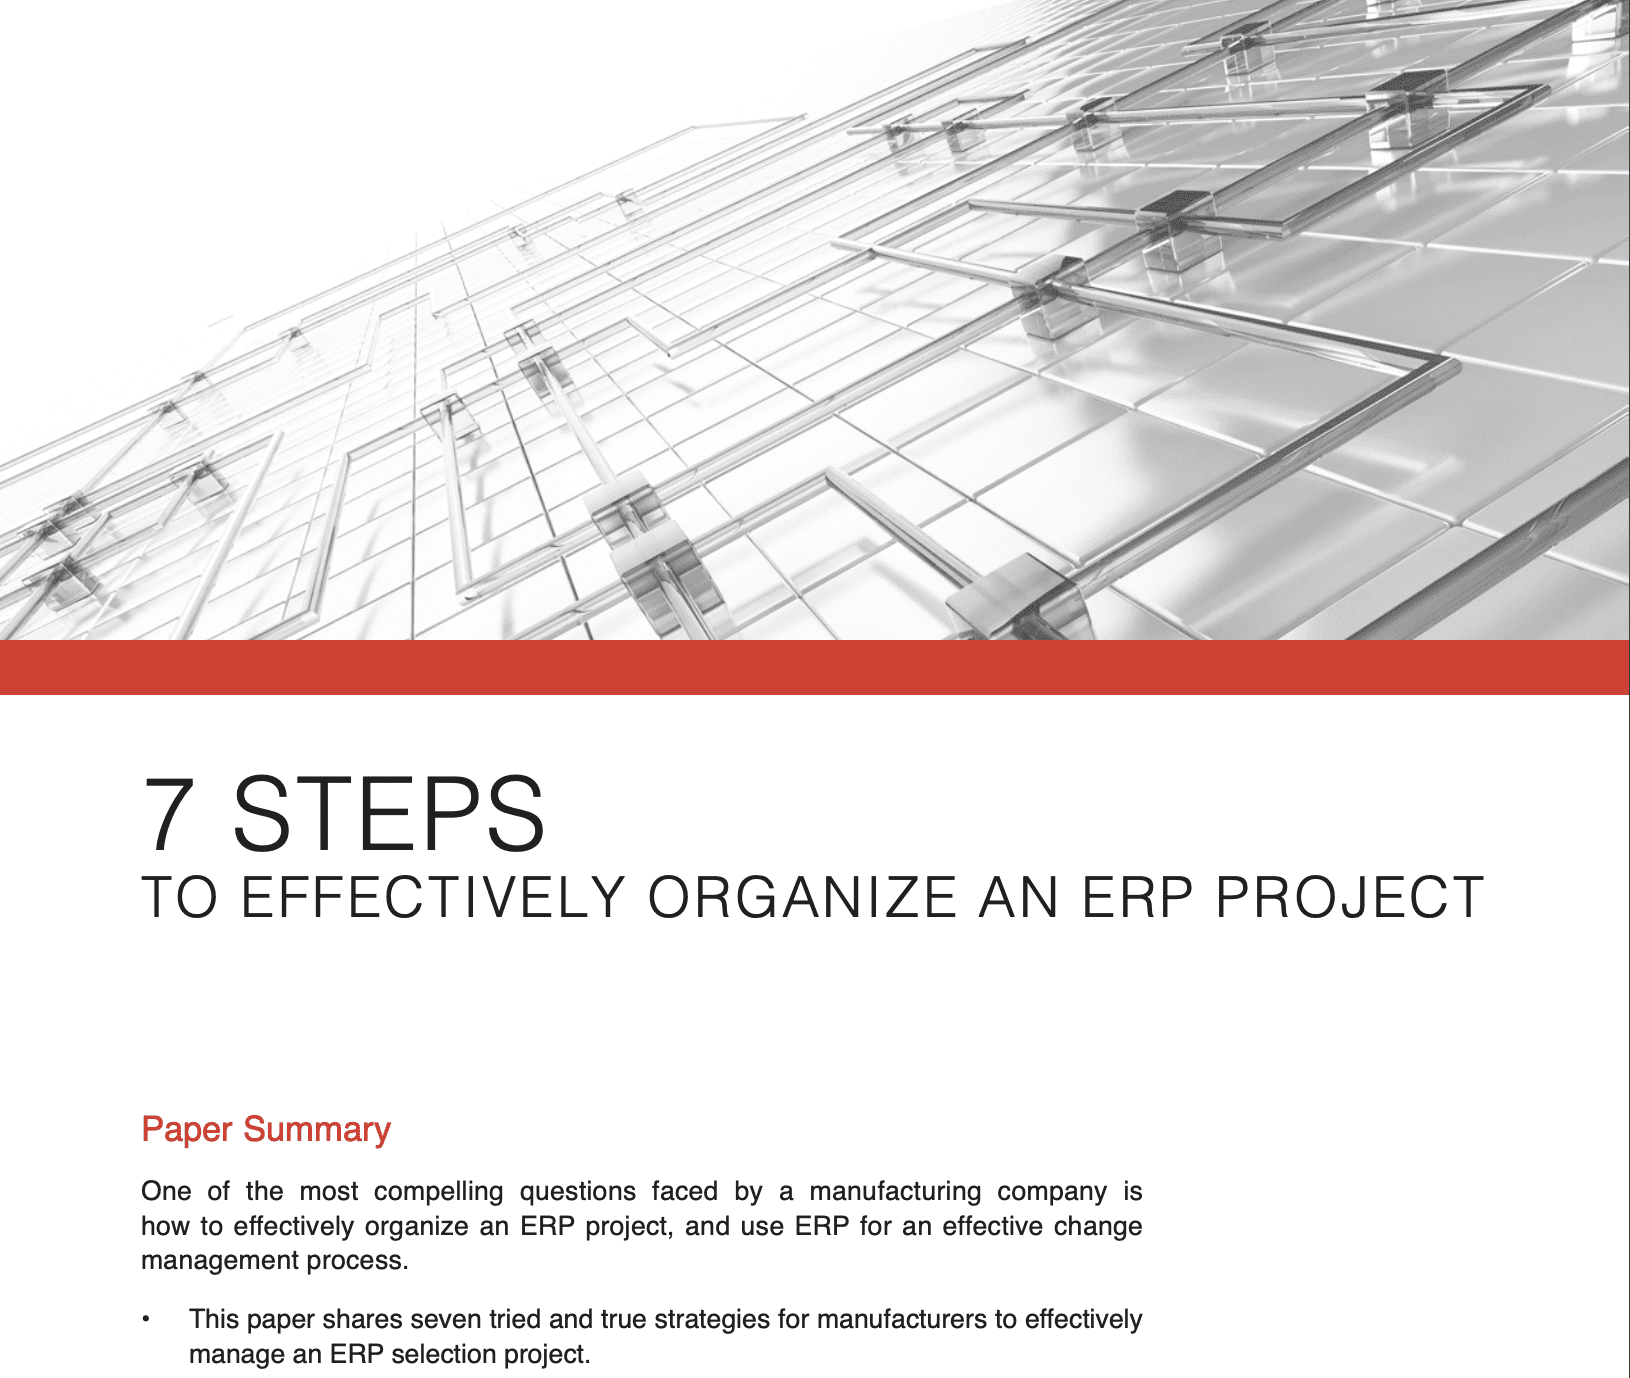 Organizing ERP project